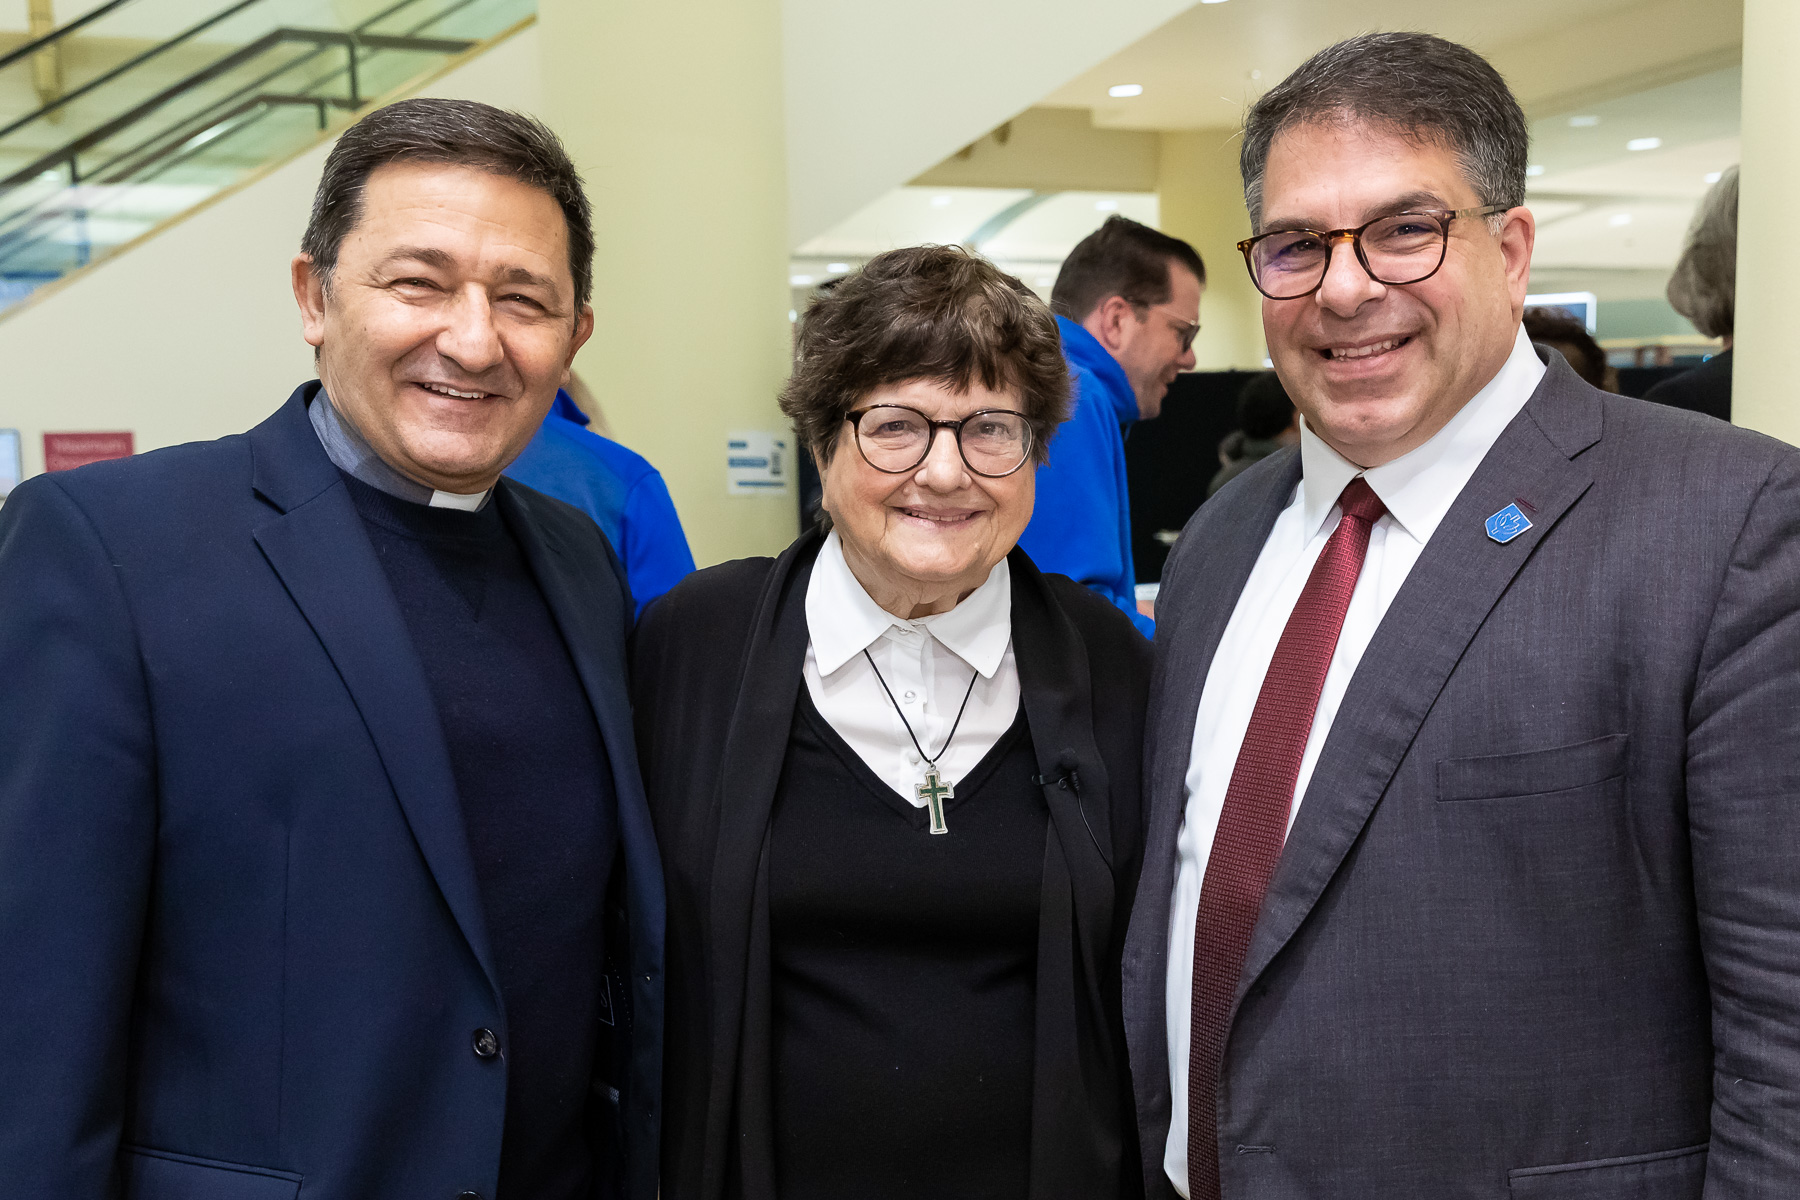 From left, Fr. Memo Campuzano, C.M., Sister Helen Prejean, C.S.J., and Rob Manuel, president of DePaul.